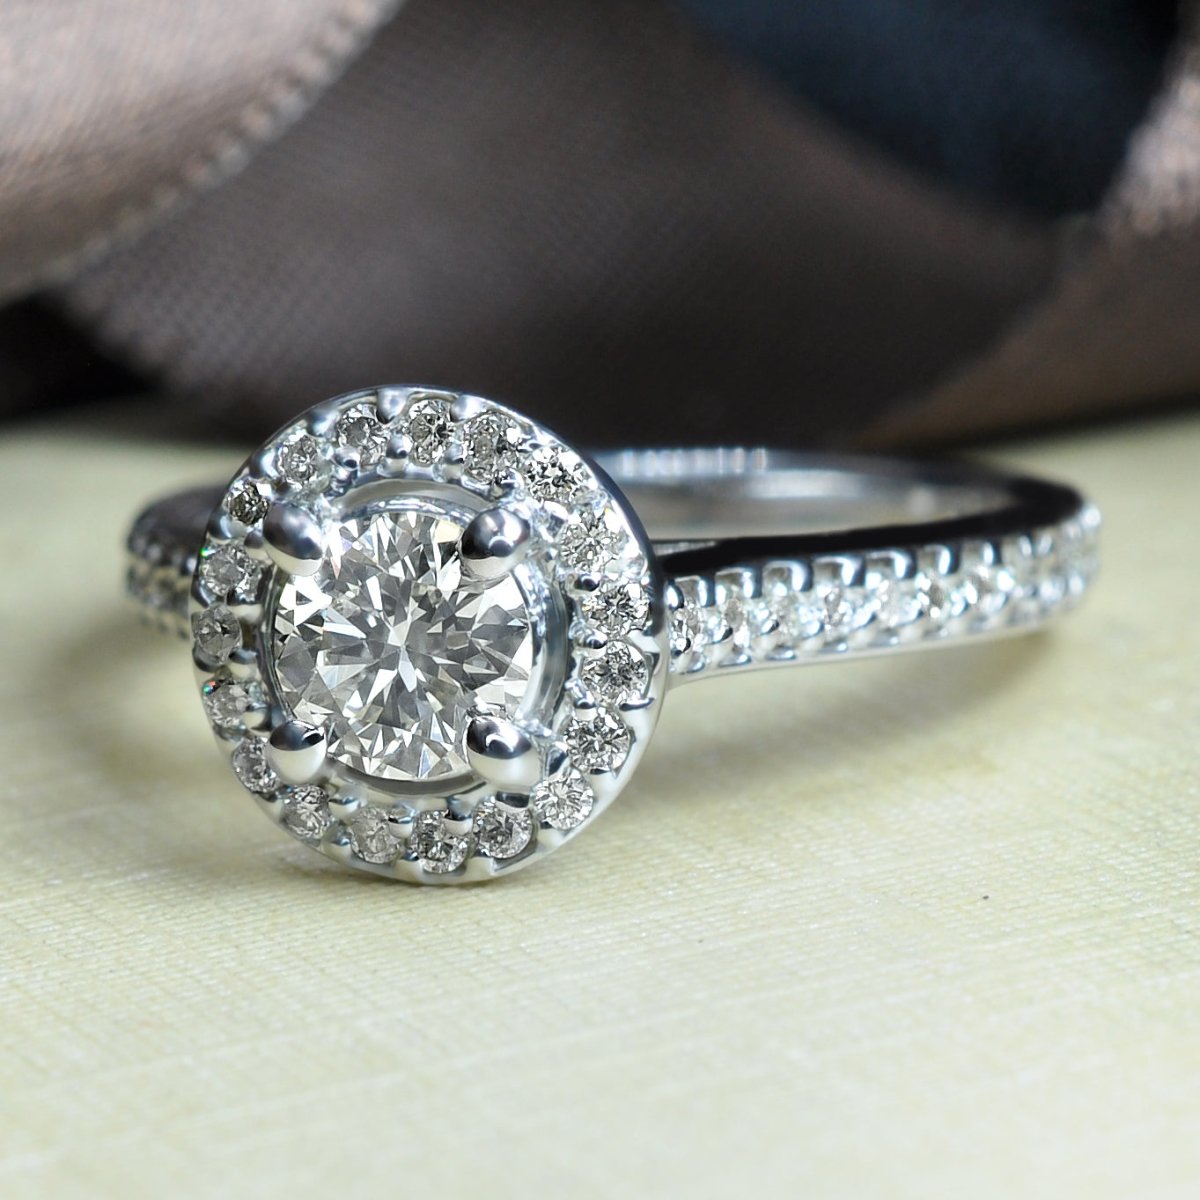 Low-Cost 0.90 CT Round Cut Diamond Engagement Ring in 14 KT White Gold - Primestyle.com